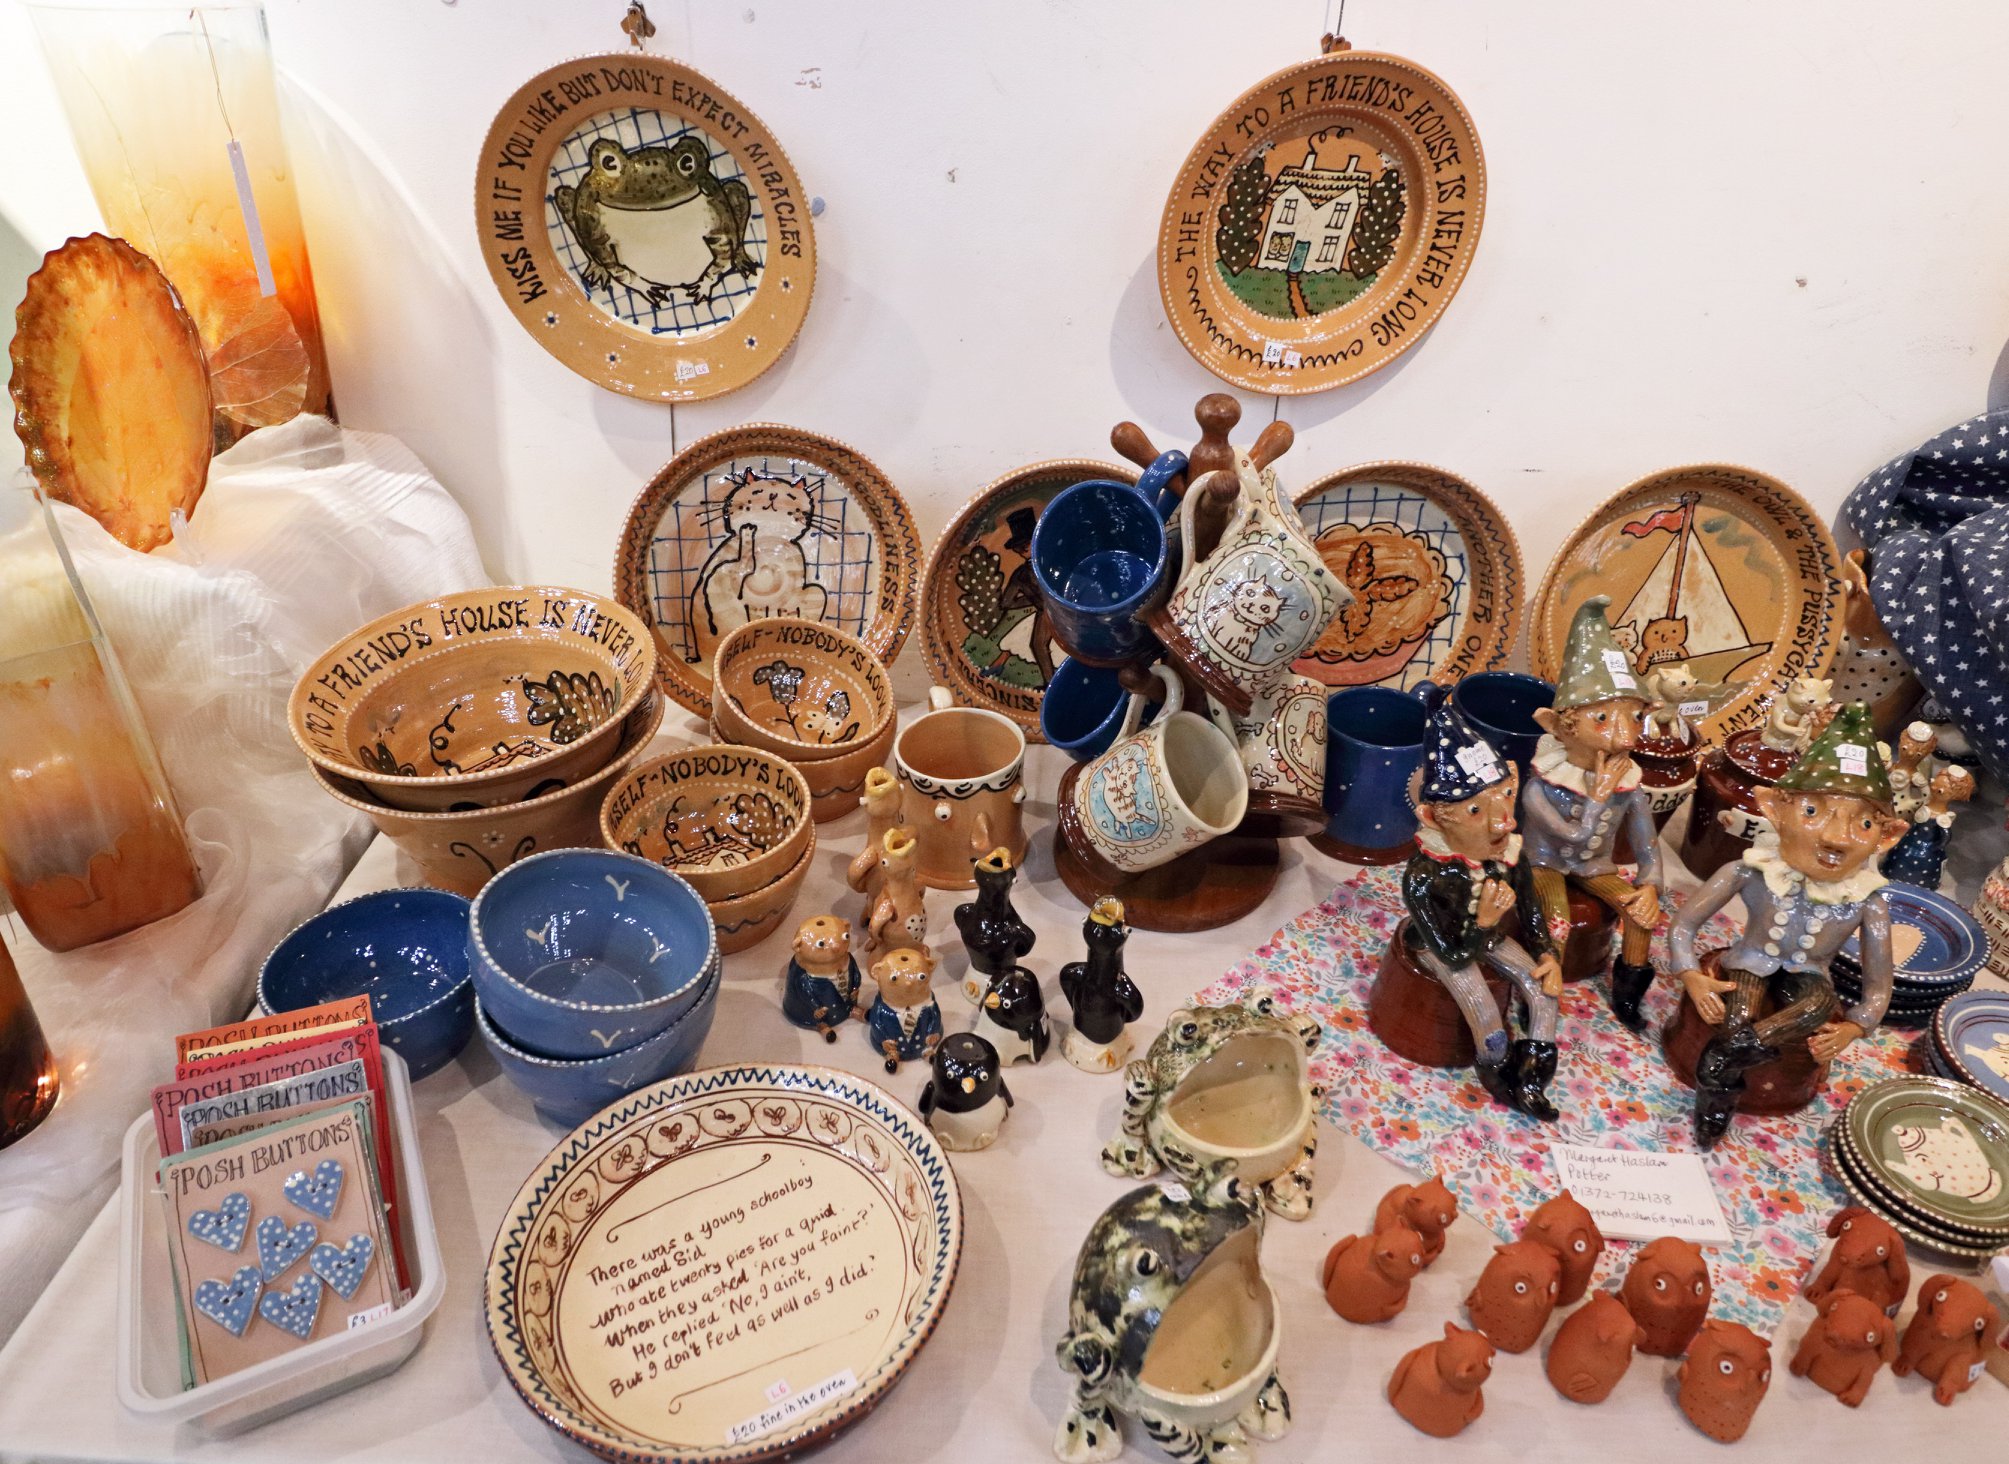 Picture of crafts available at the fair